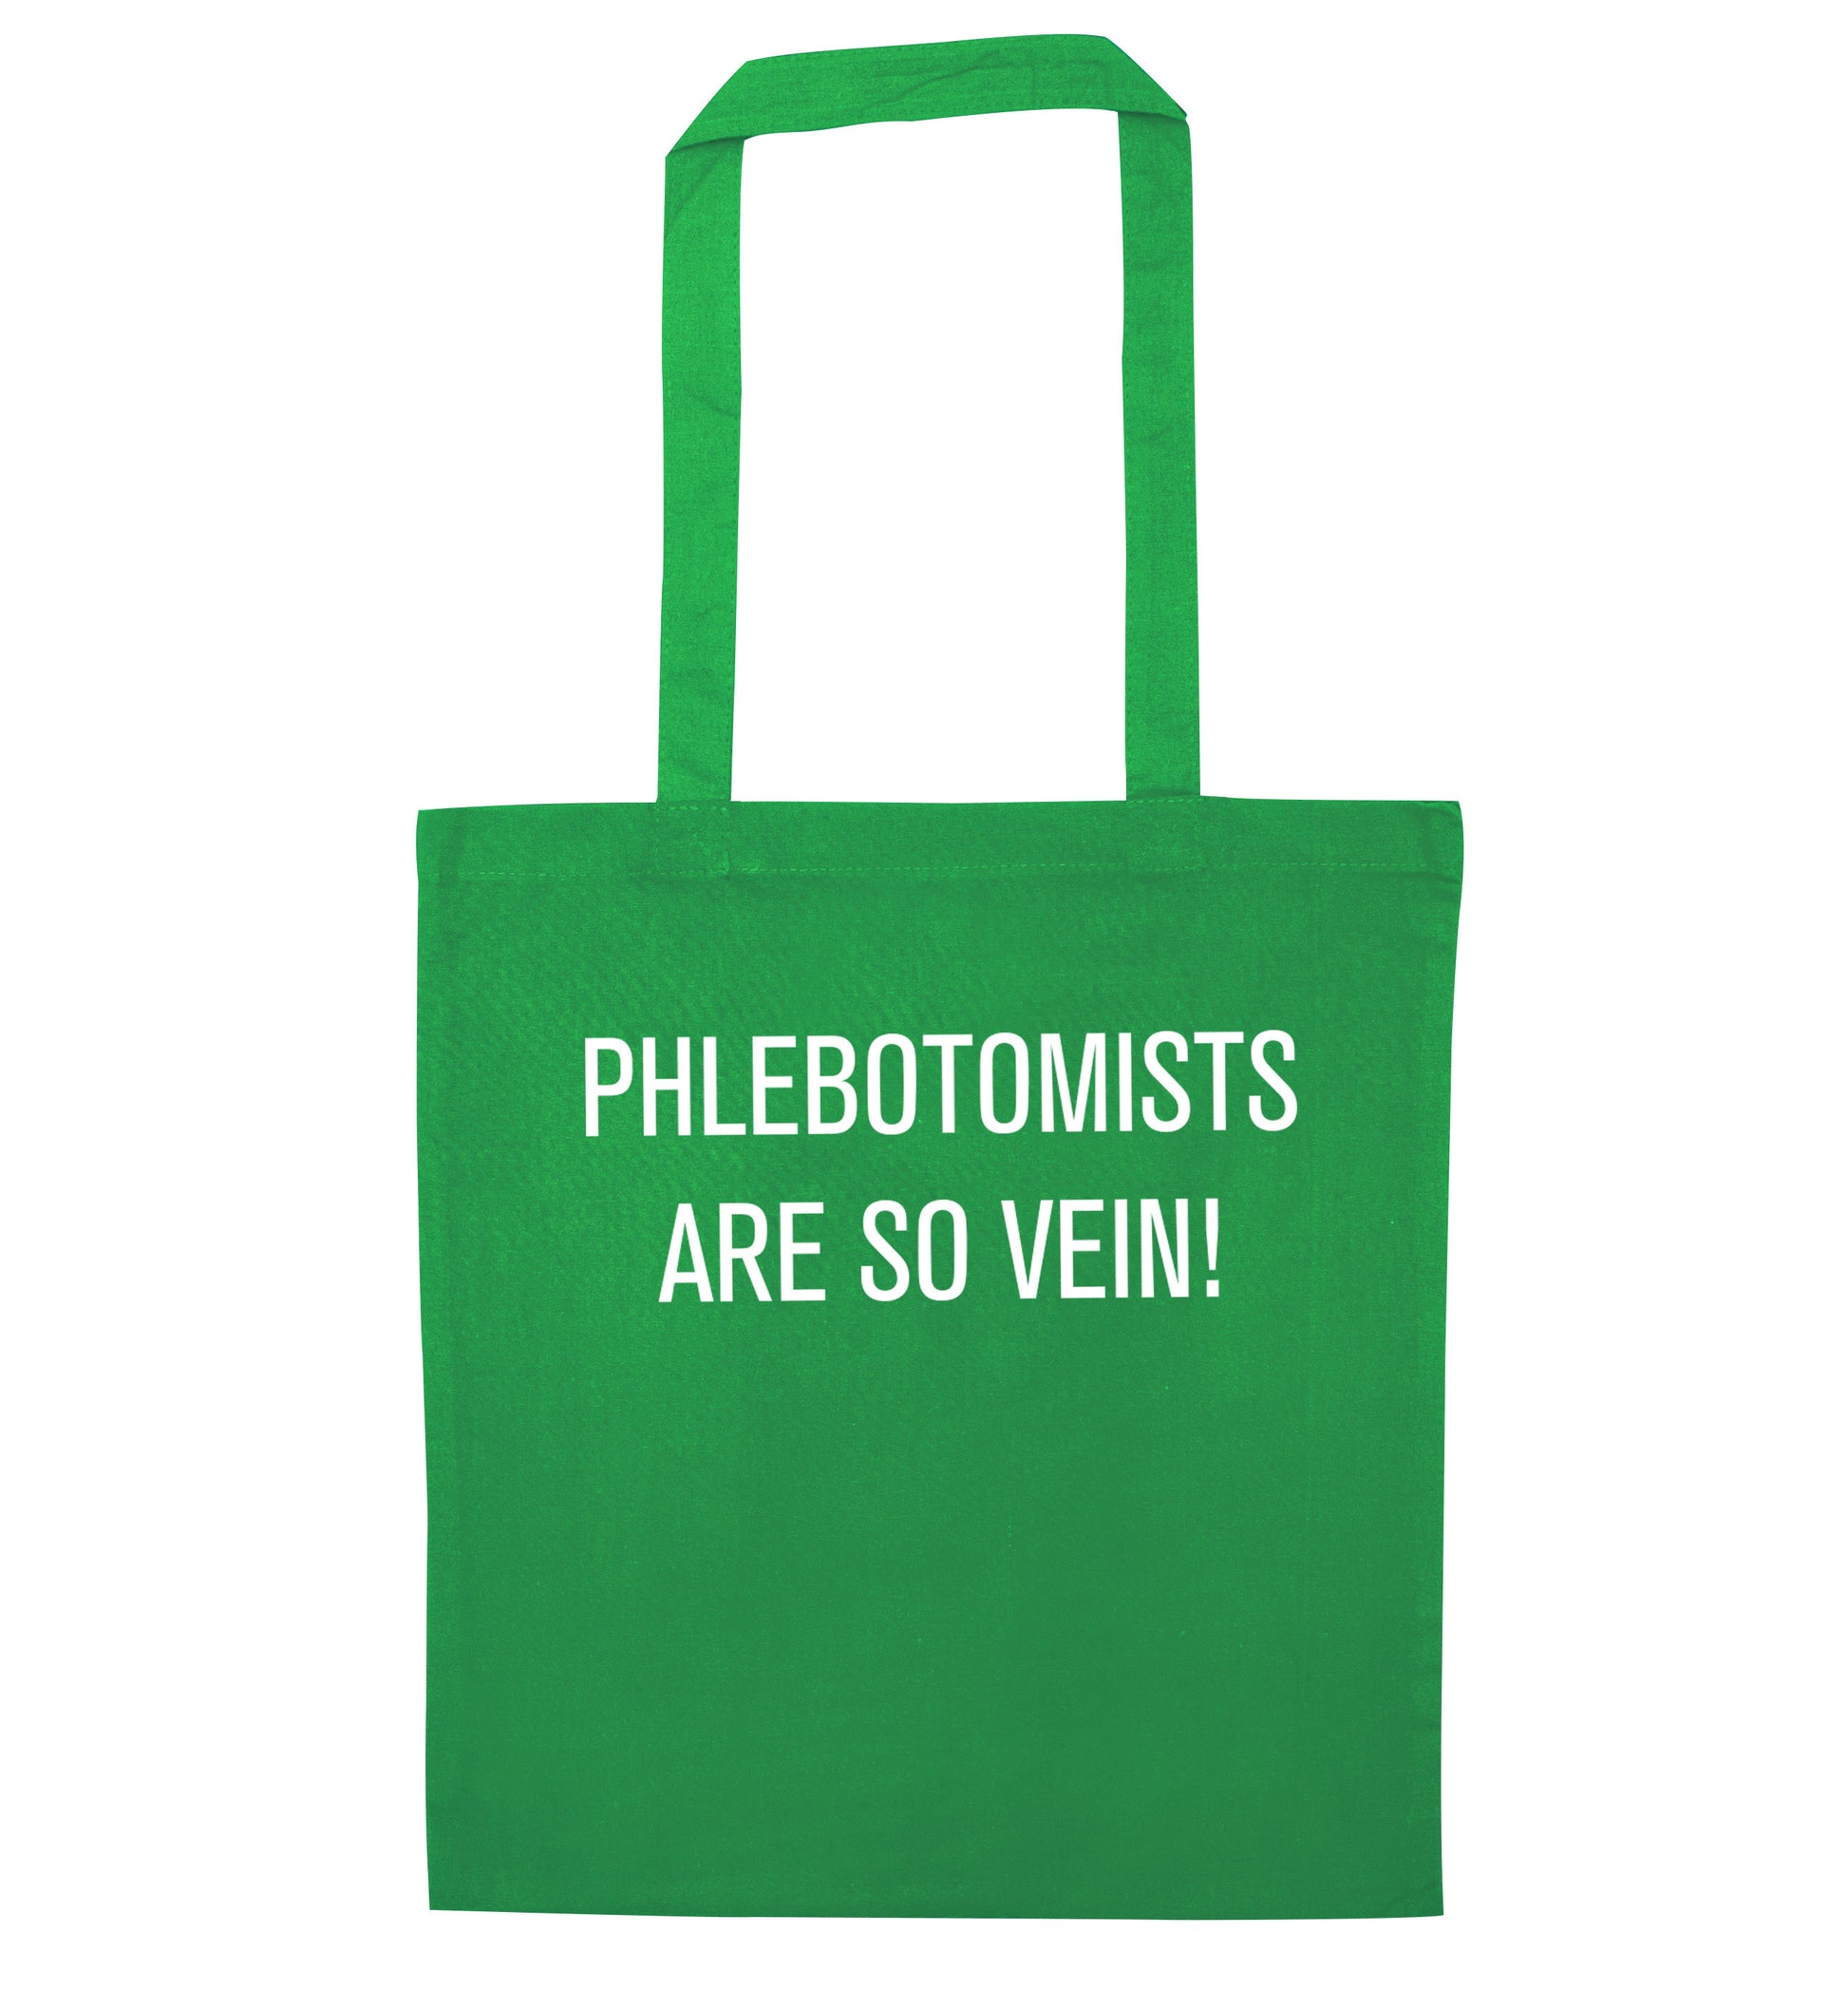 Phlebotomists are so vein! green tote bag